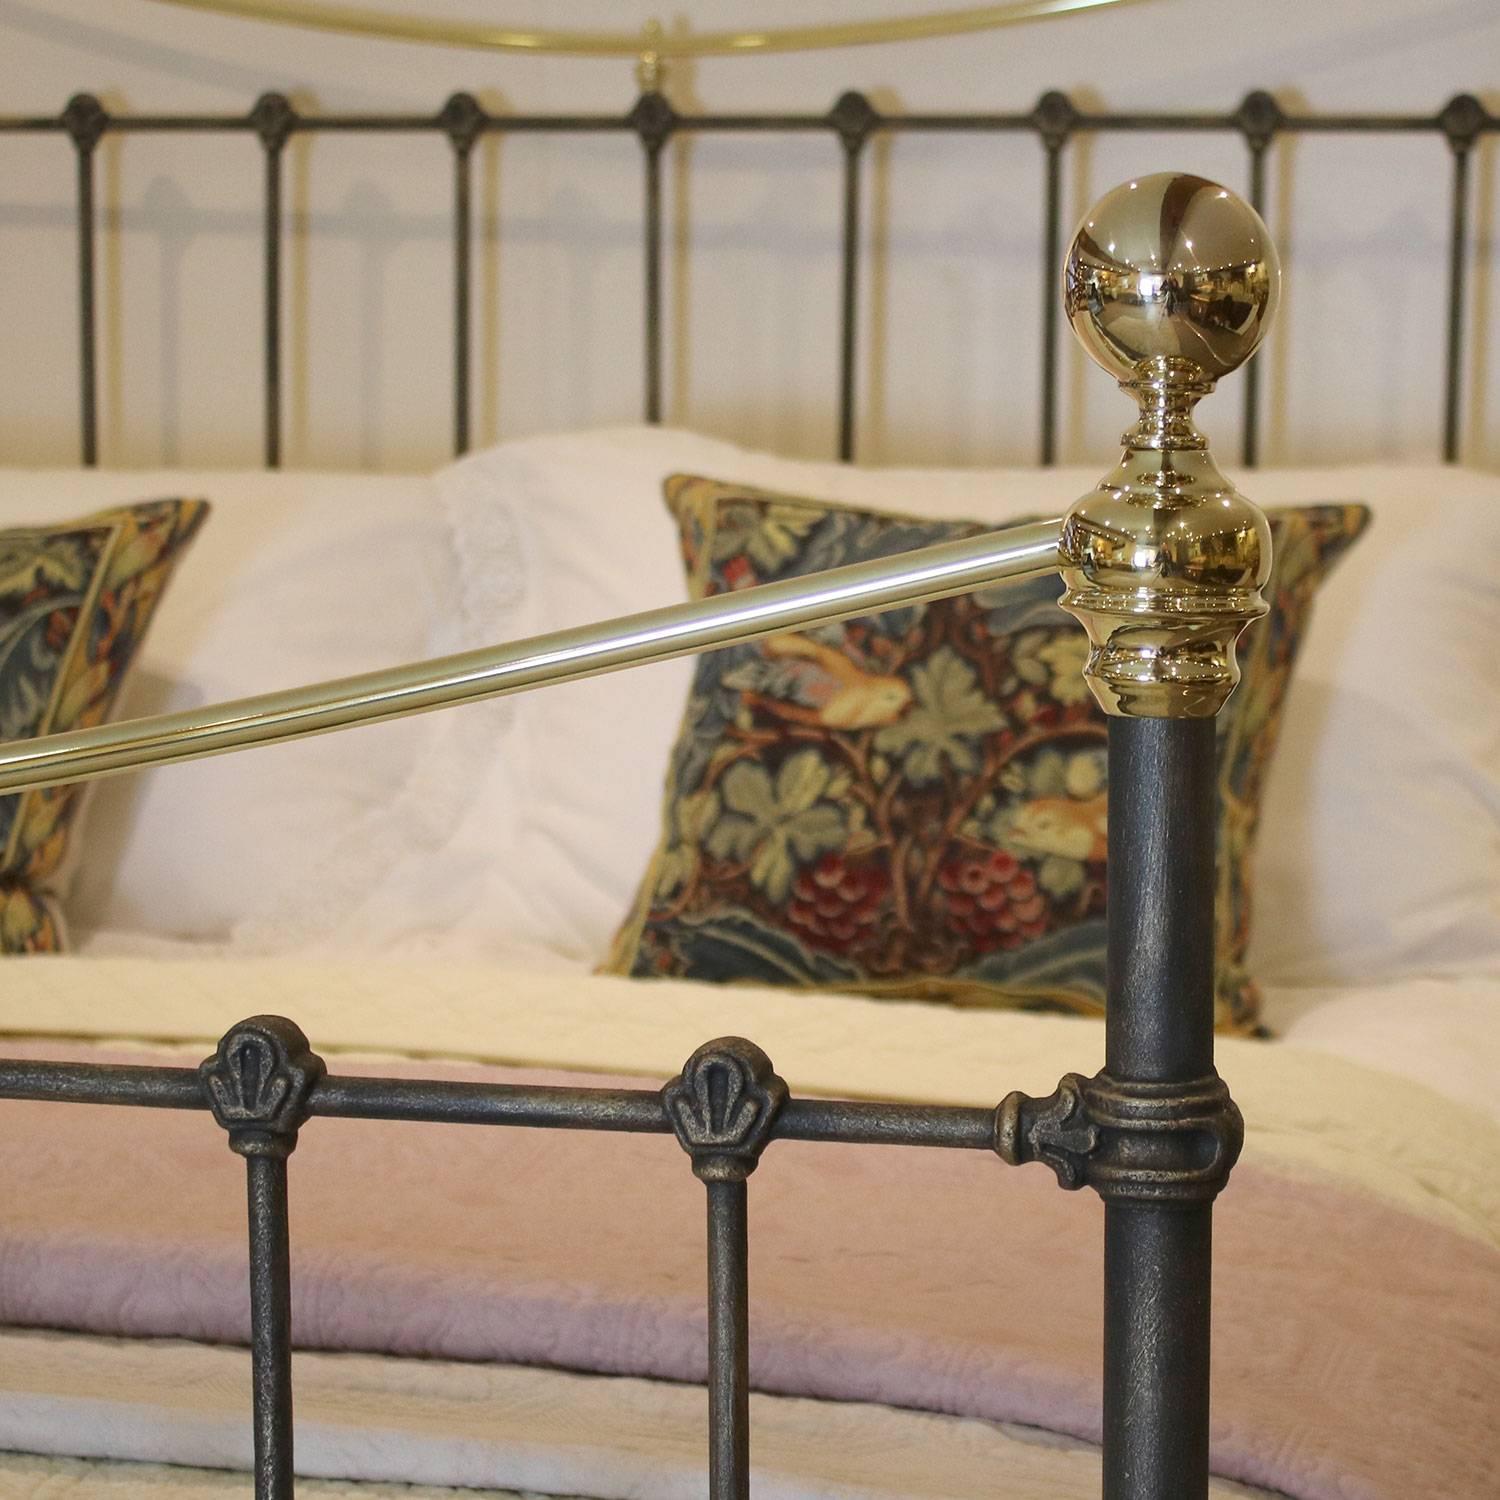 Late 19th Century Brushed Gold Antique Bed, MK143